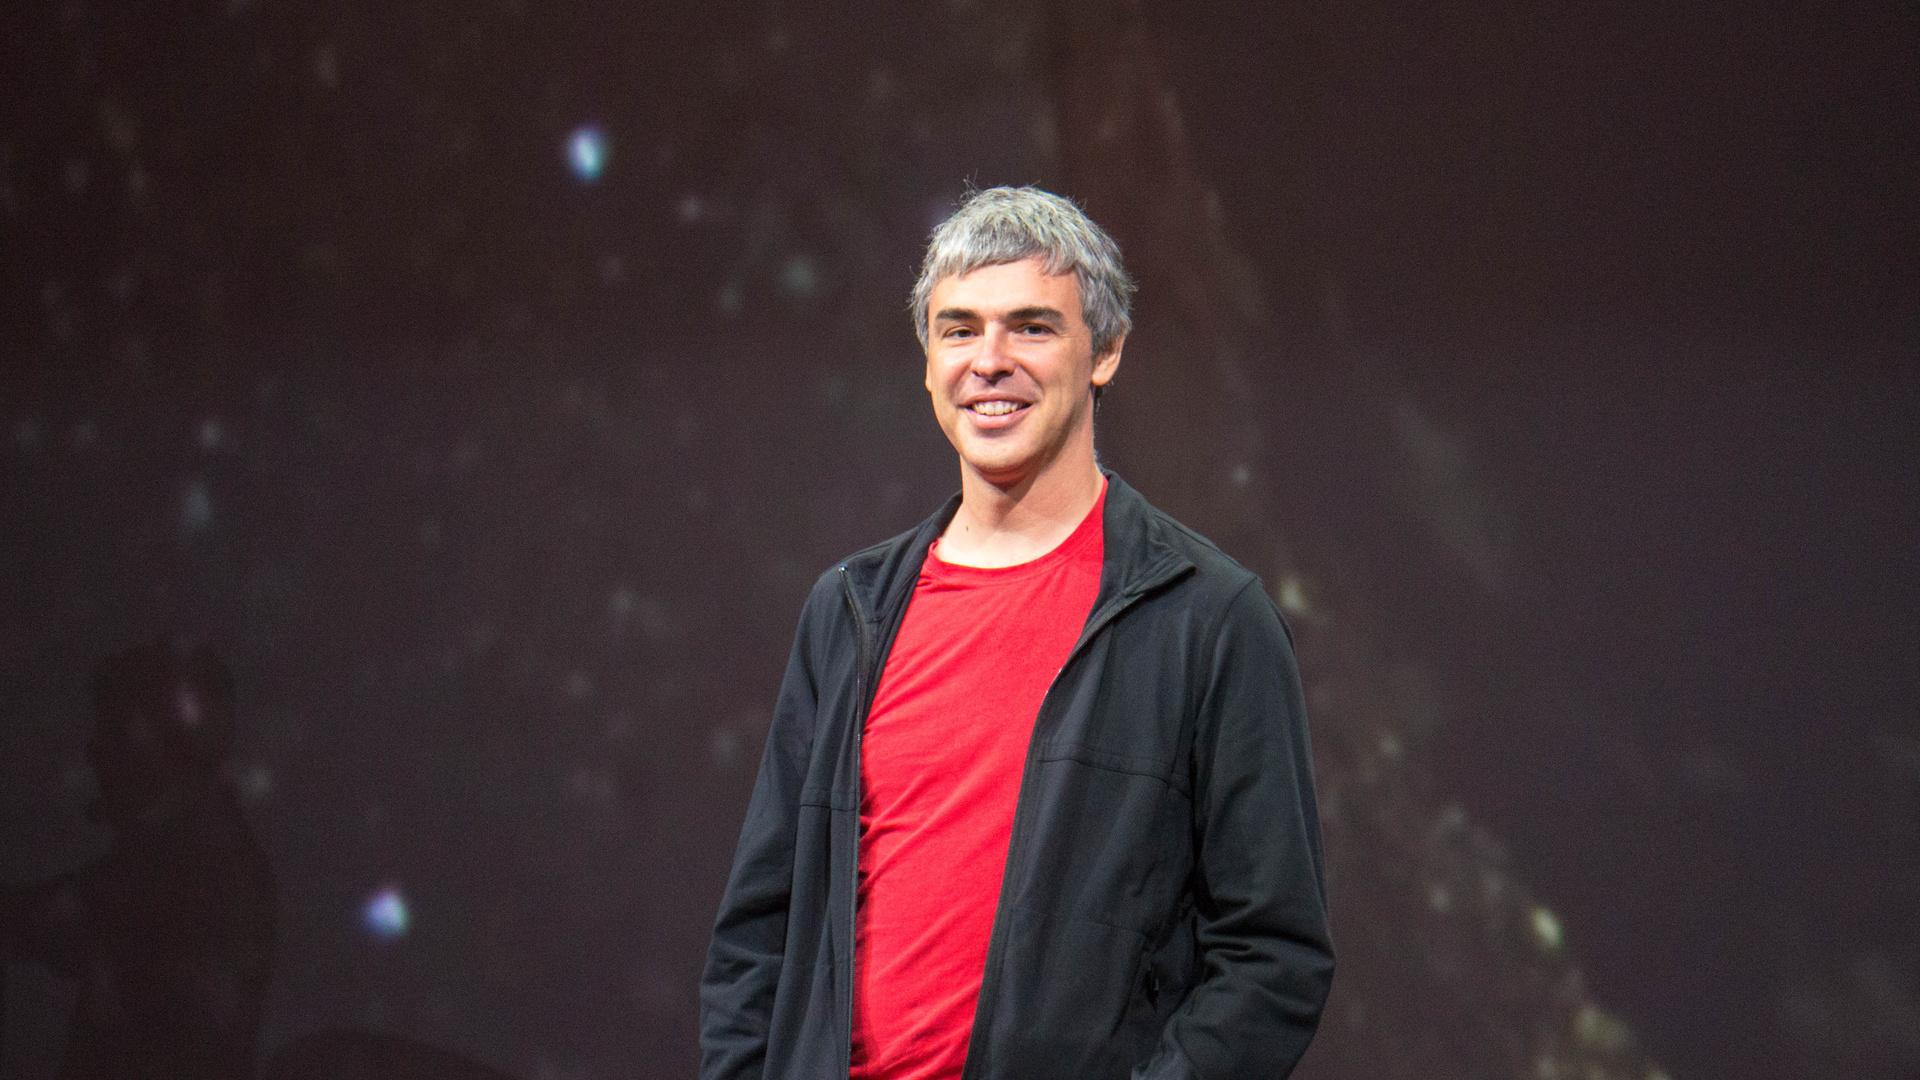 Larry Page, Google Ceo, Photo Of Larry Page, Larry Page